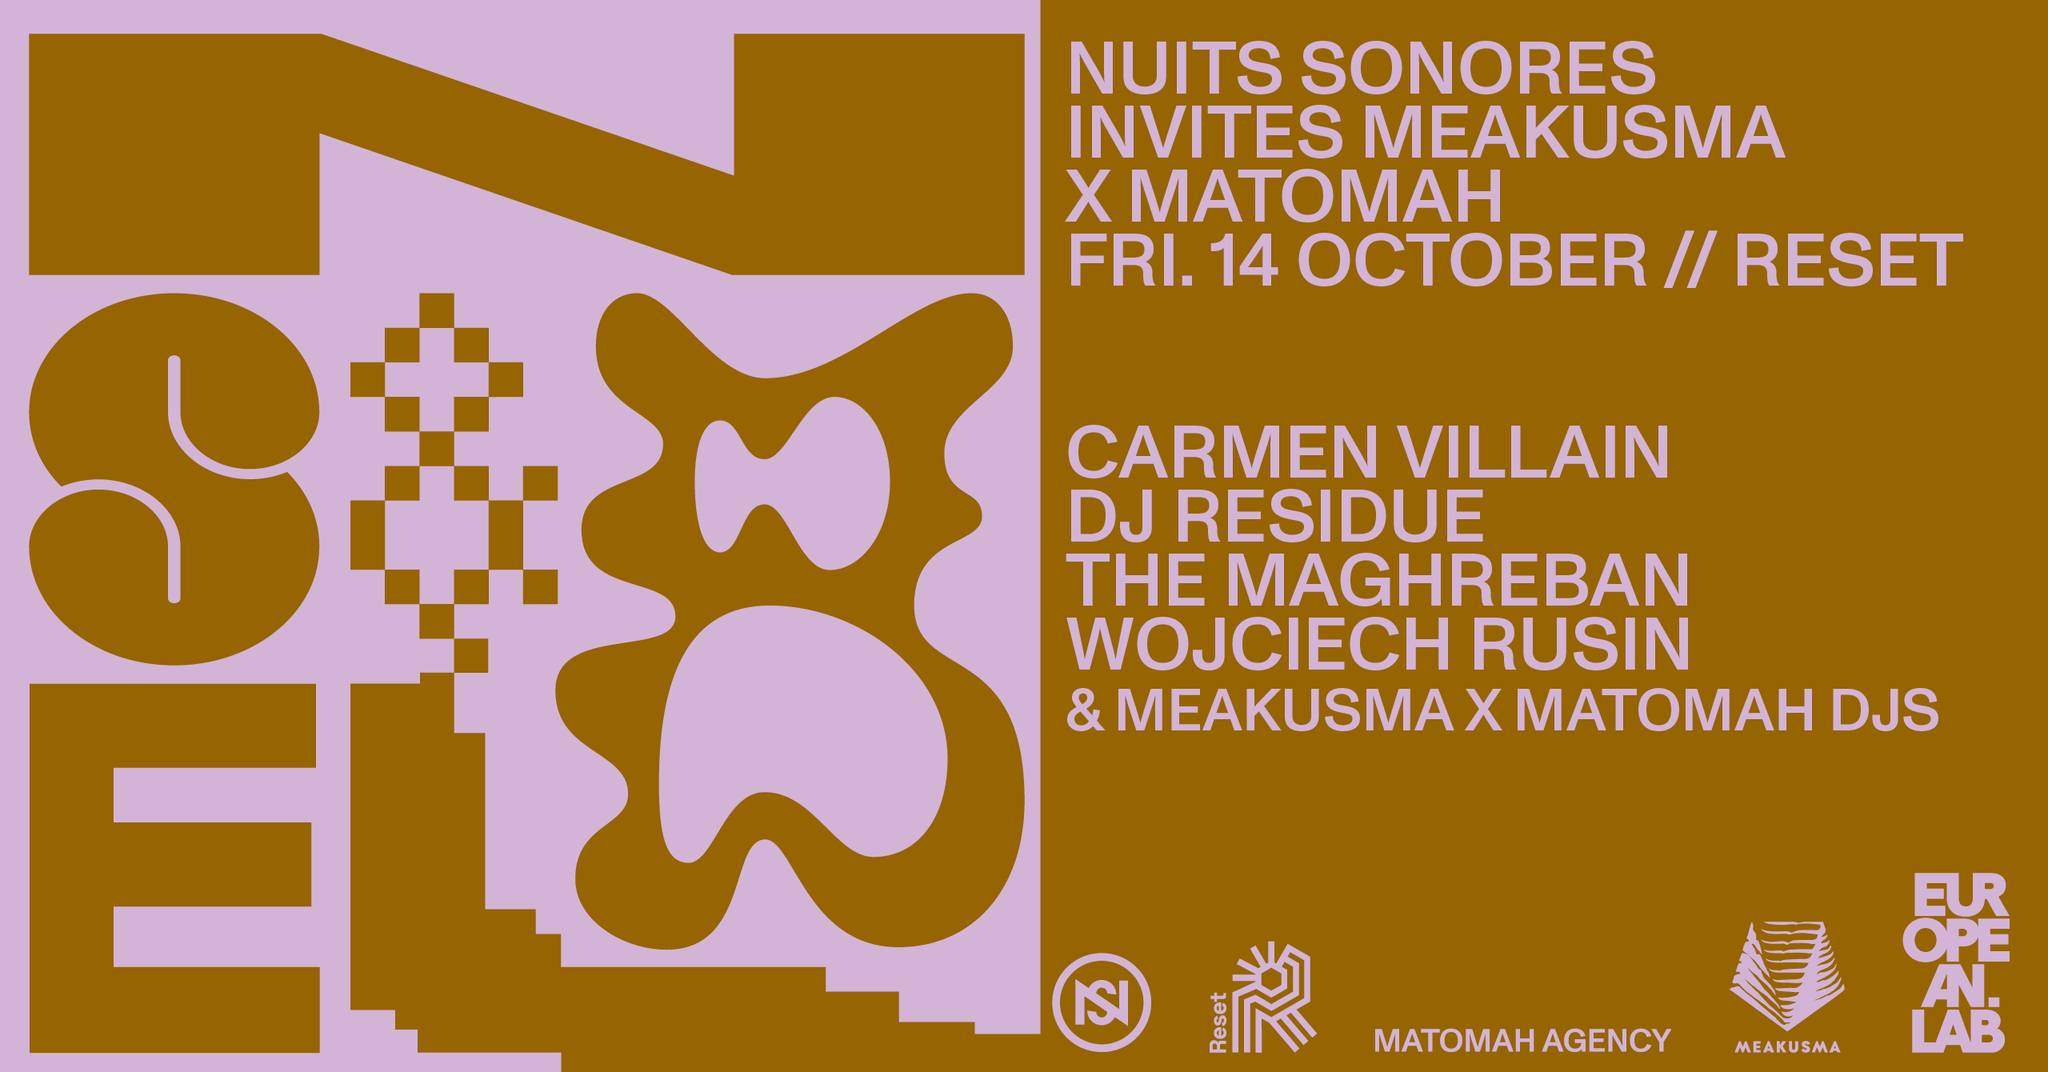 Nuits Sonores invites Meakusma x Matomah - フライヤー表